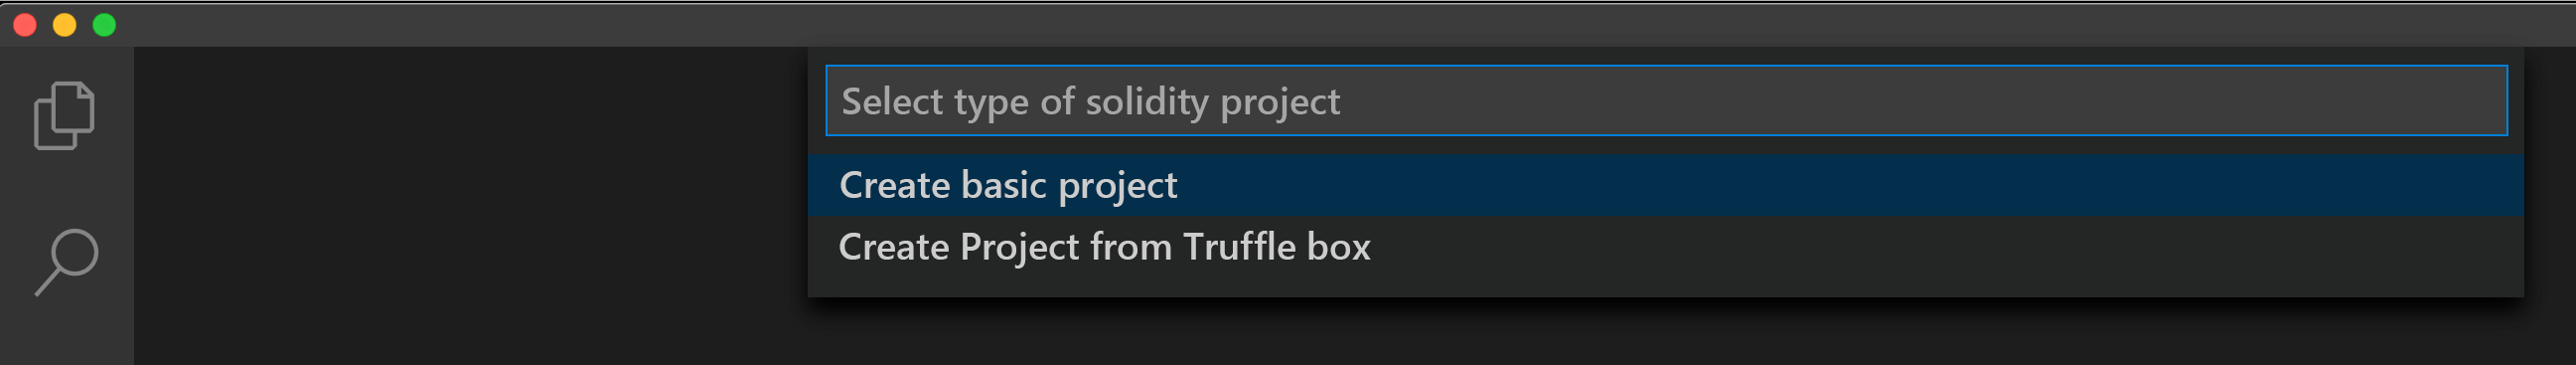 Screenshot showing the Create basic project selection in Visual Studio Code.